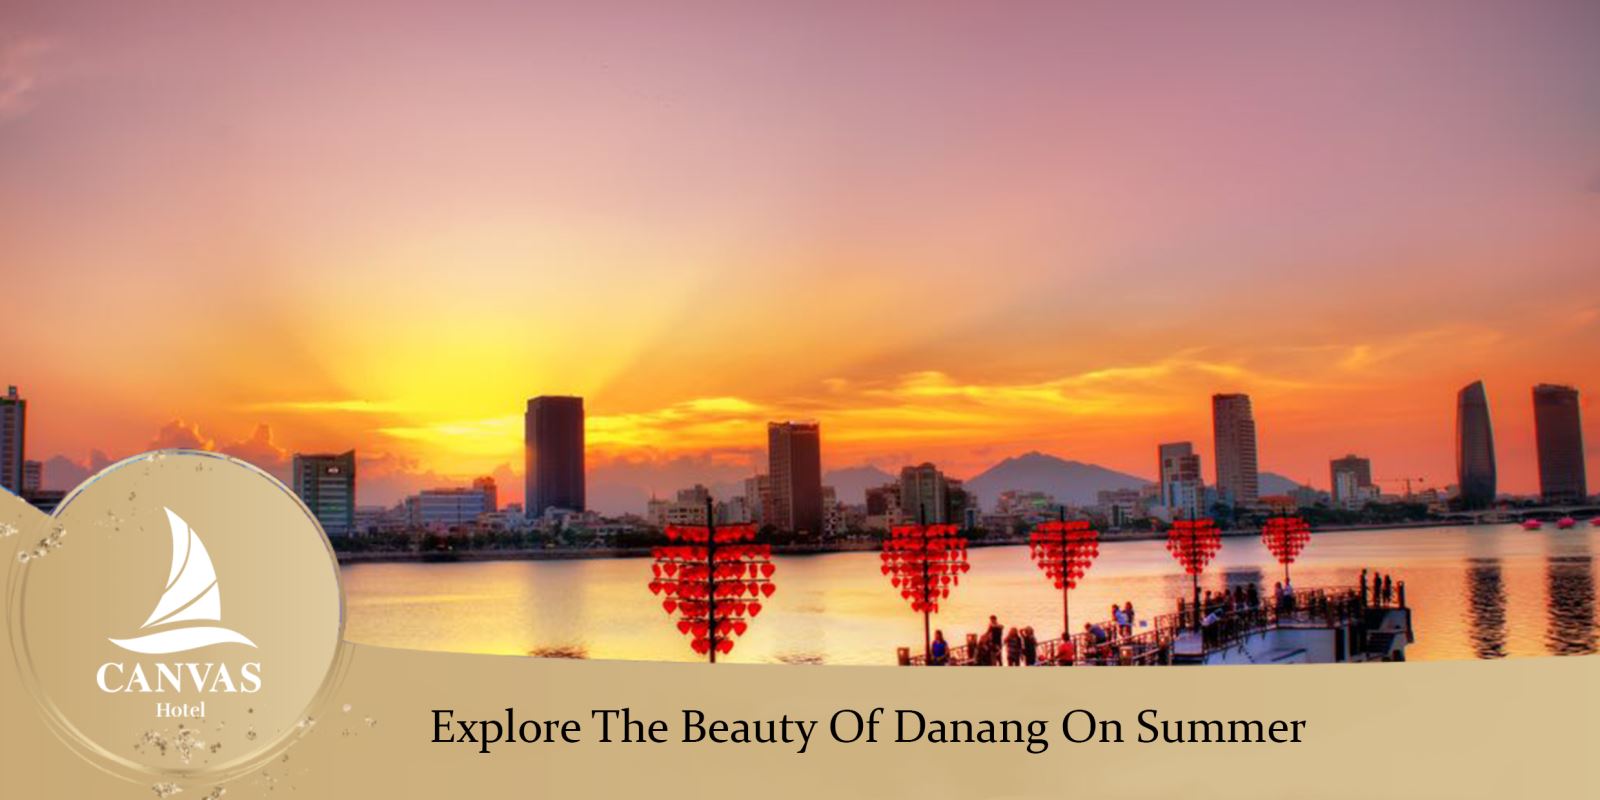 Explore The Beauty Of Danang On Summer